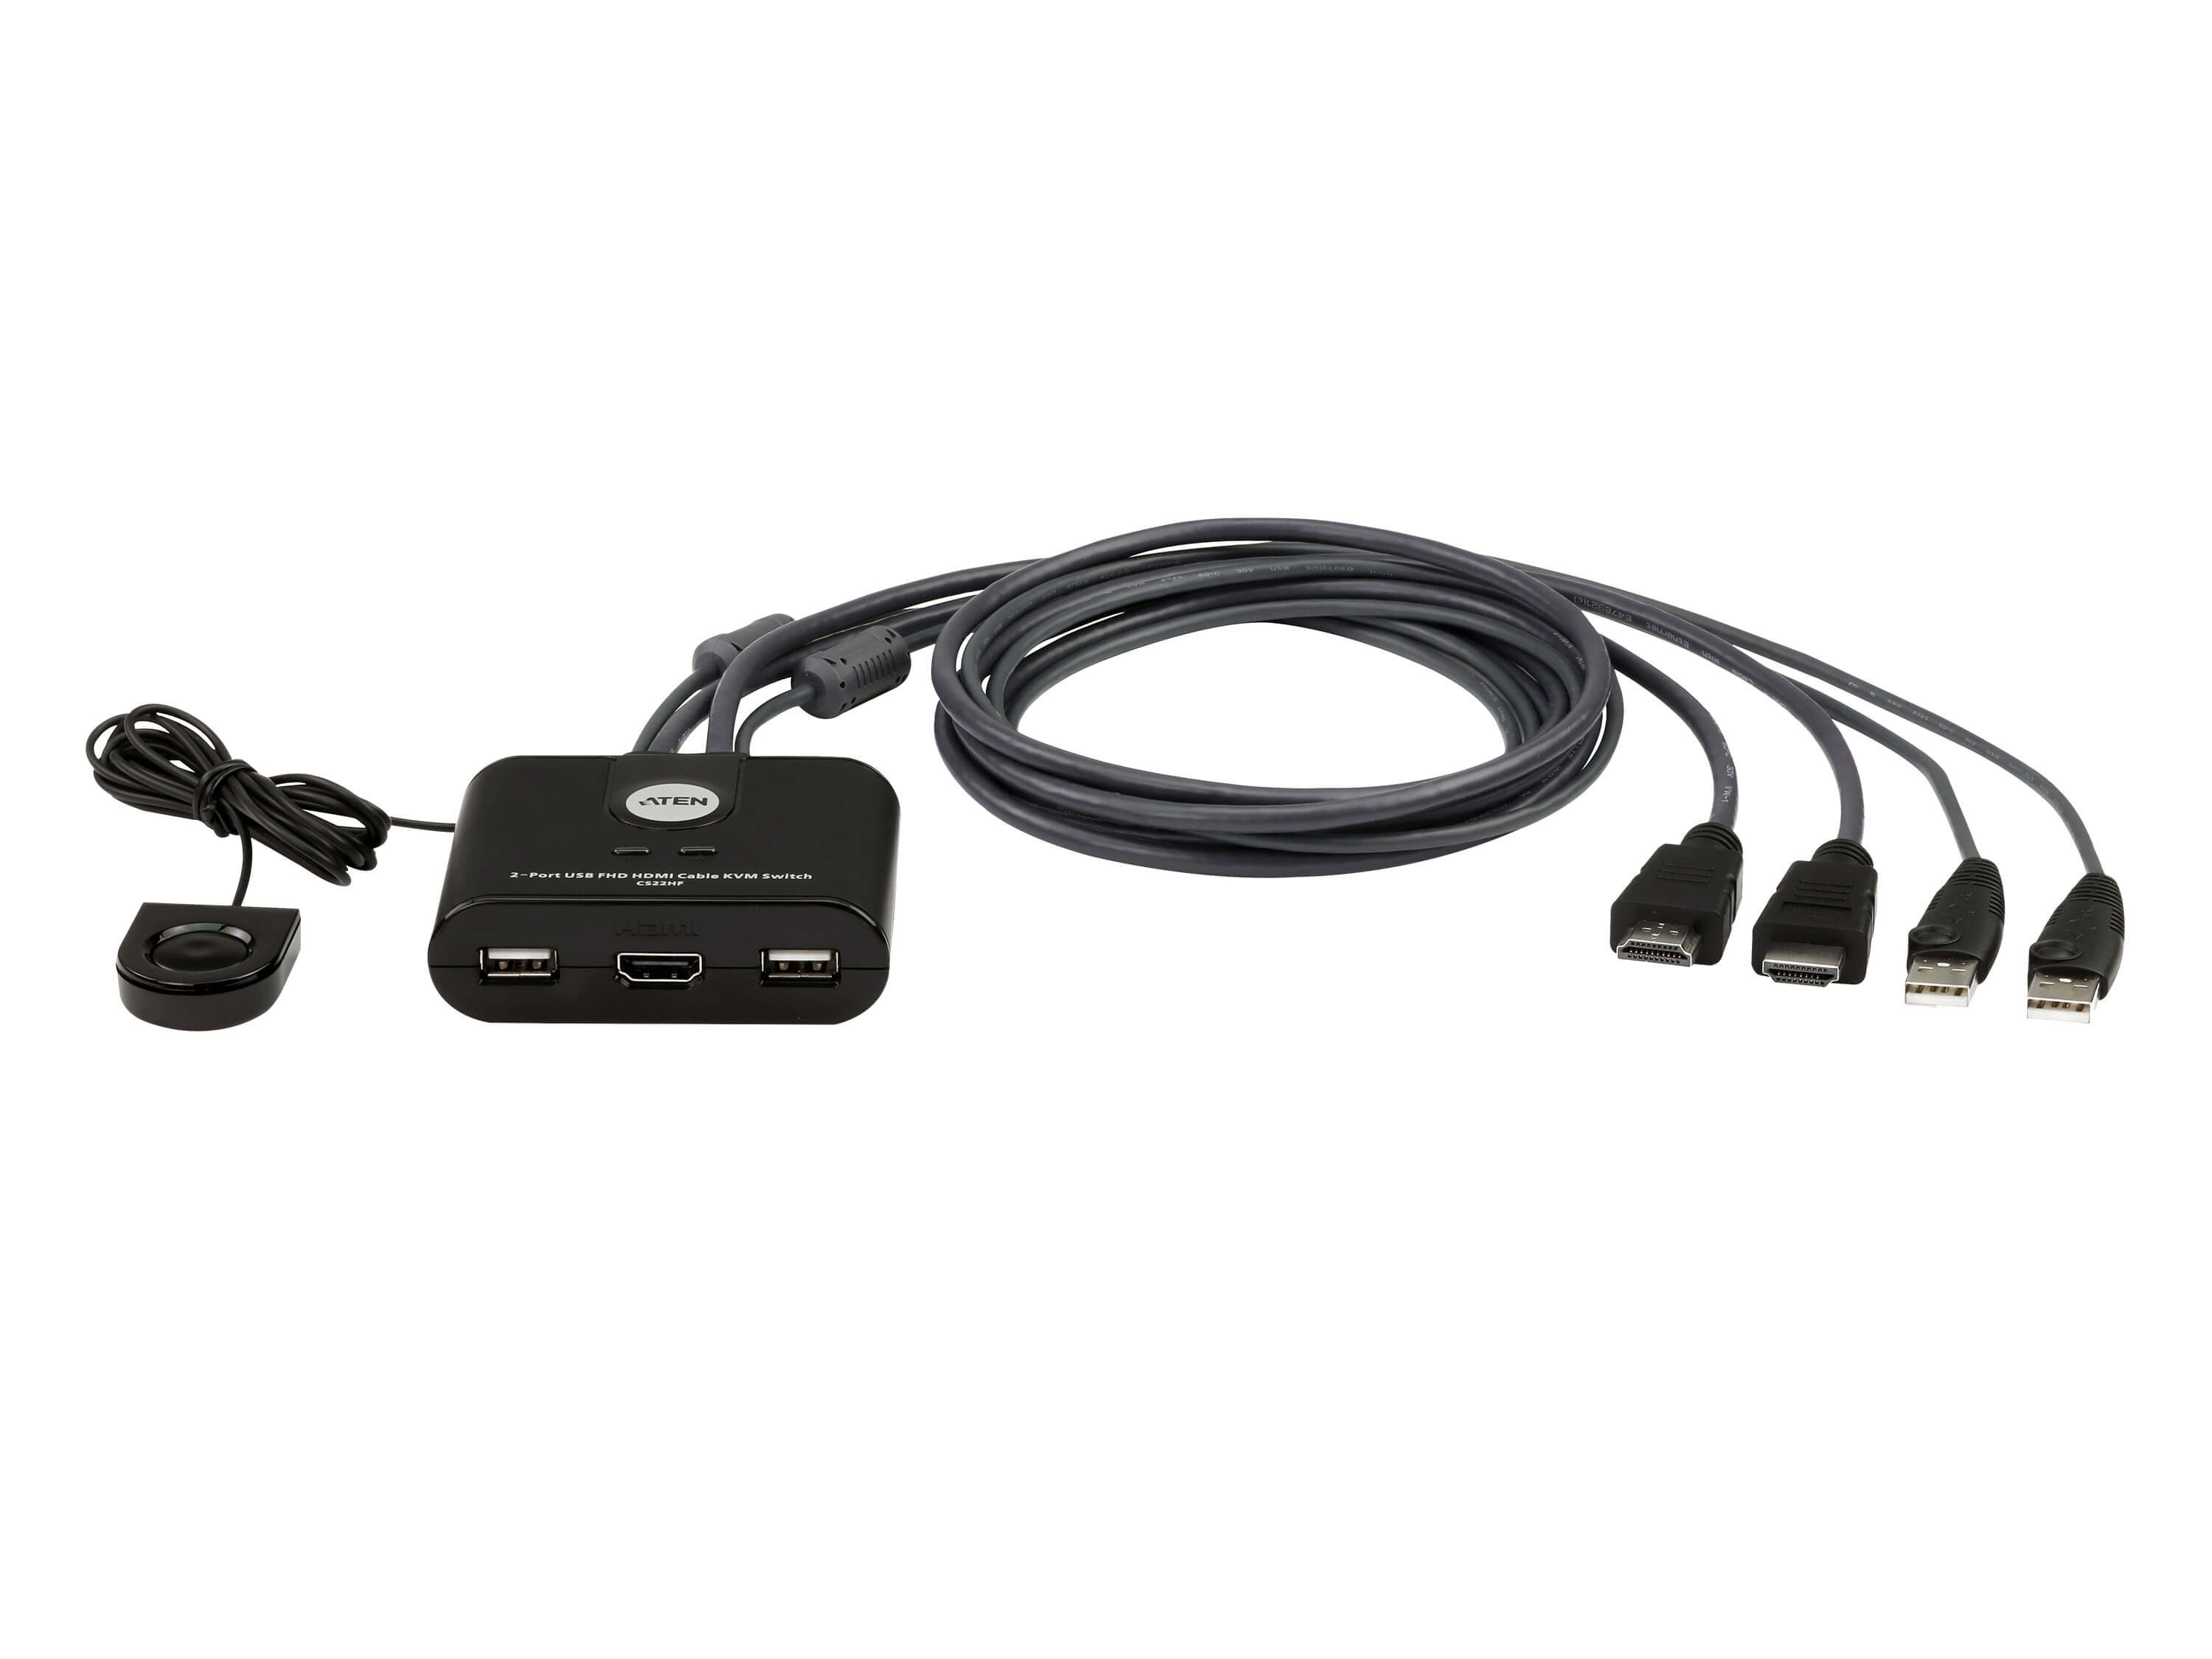 CS22HF 2-Port USB FHD HDMI Cable KVM Switch by Aten